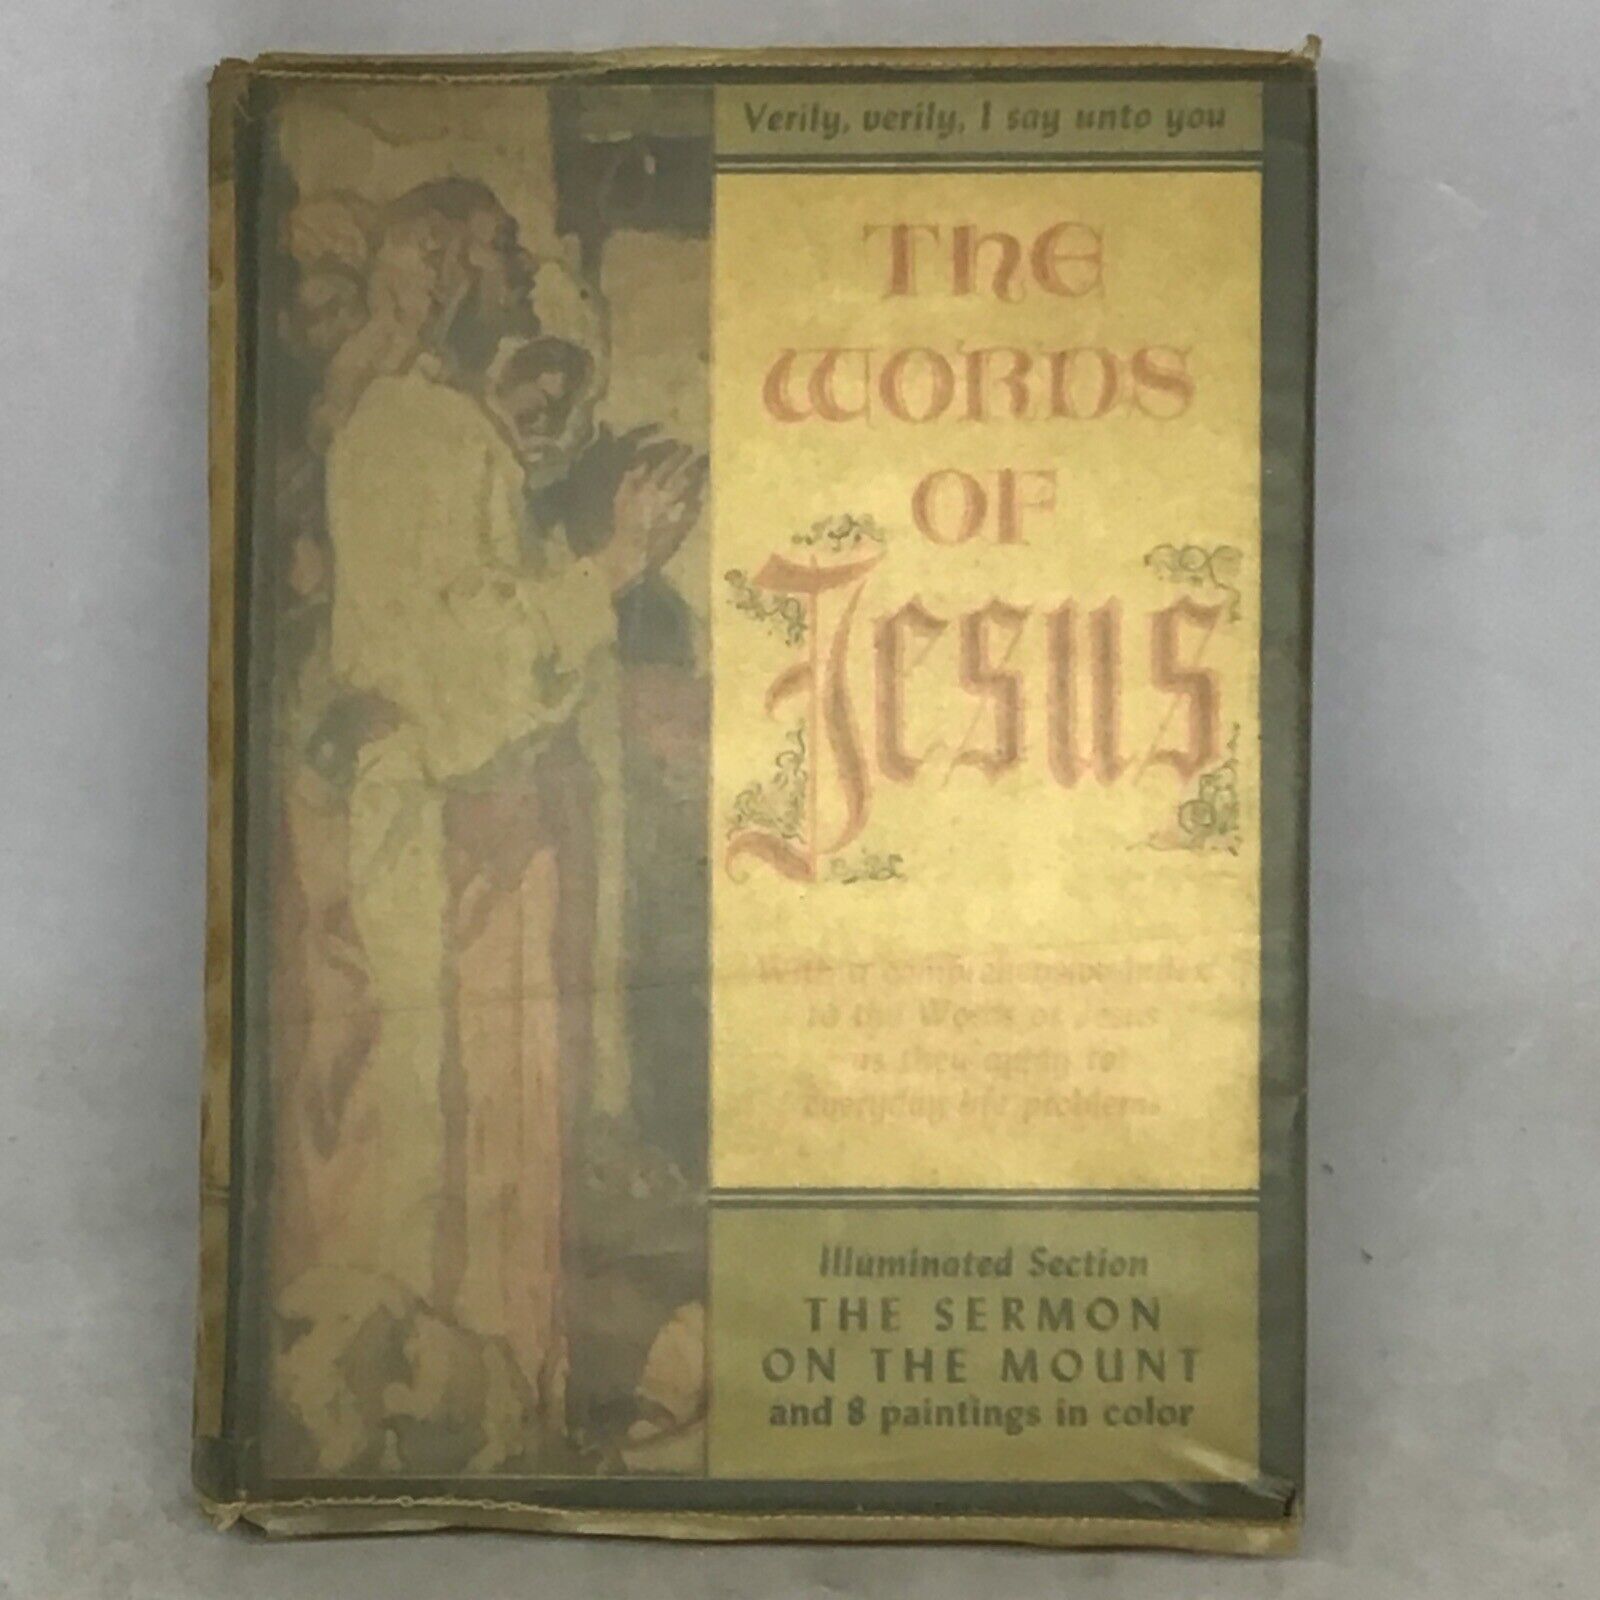 Vint. The Words of Jesus 1943 by Gilbert James Brett in Original Cover Protector